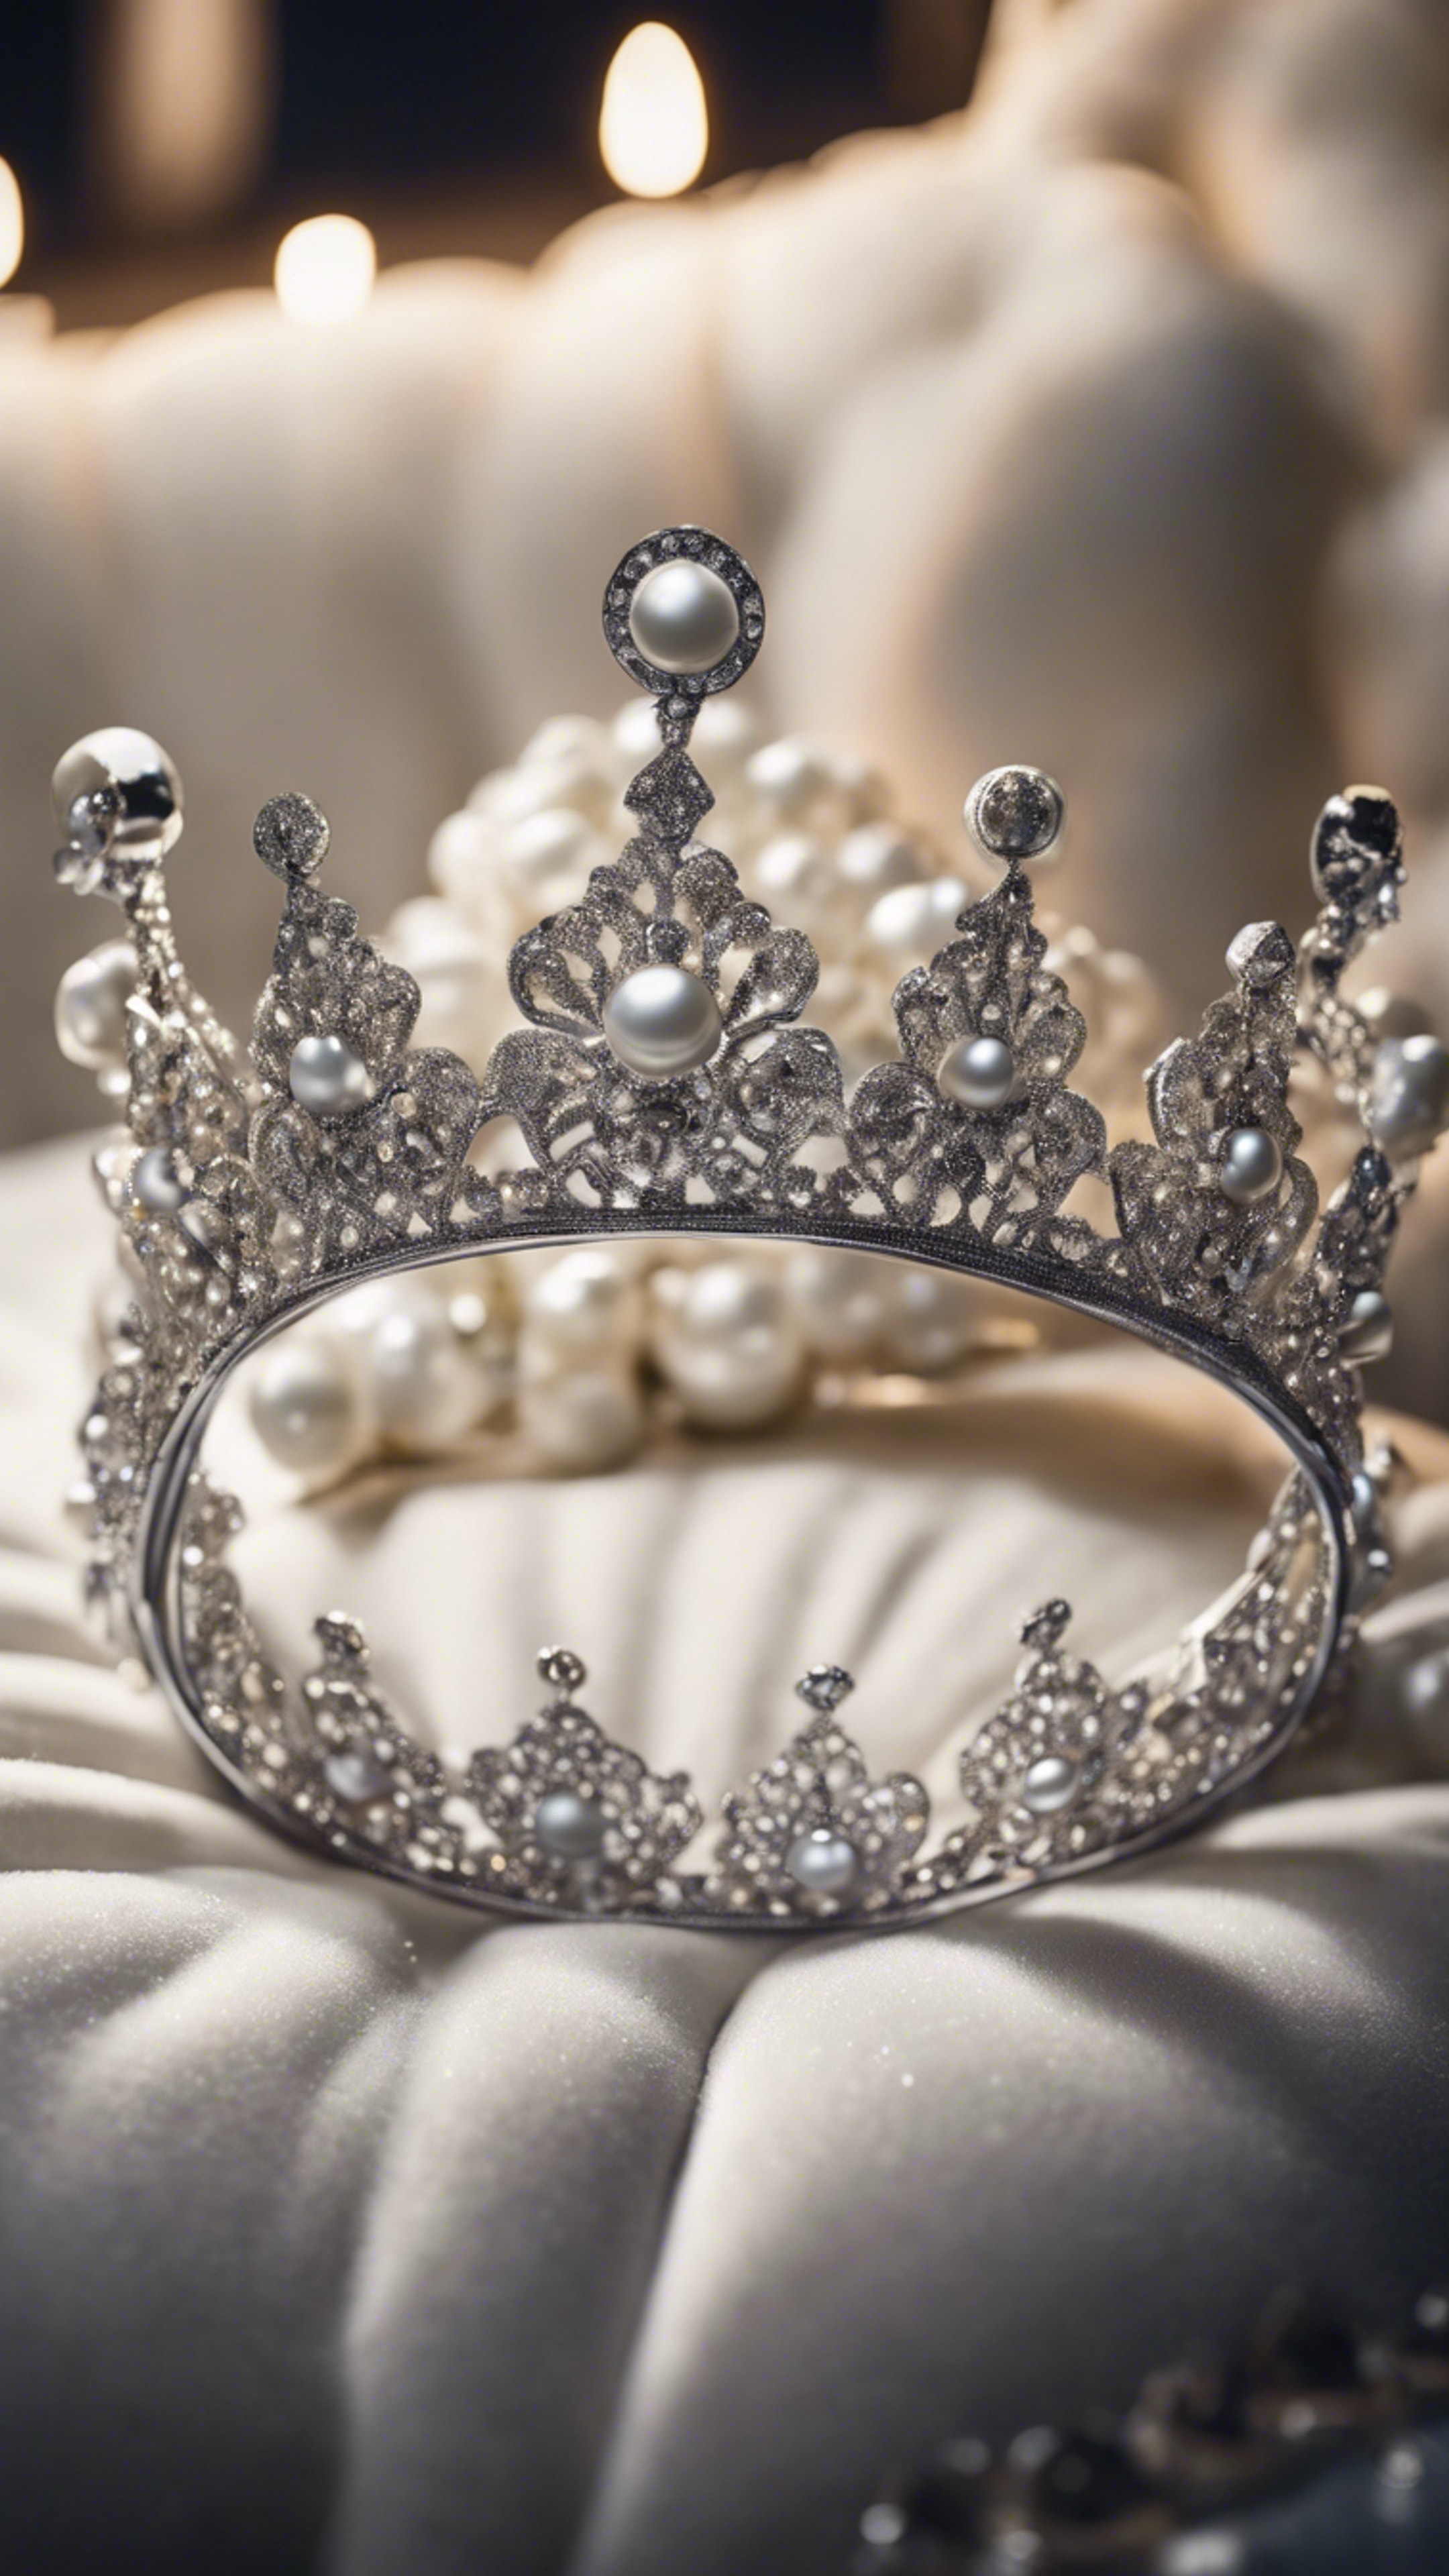 A classic silver crown embellished with pearls and diamonds lying on a white velvet cushion at night. Tapetai[f90278dd6b1c4e9ca8cc]